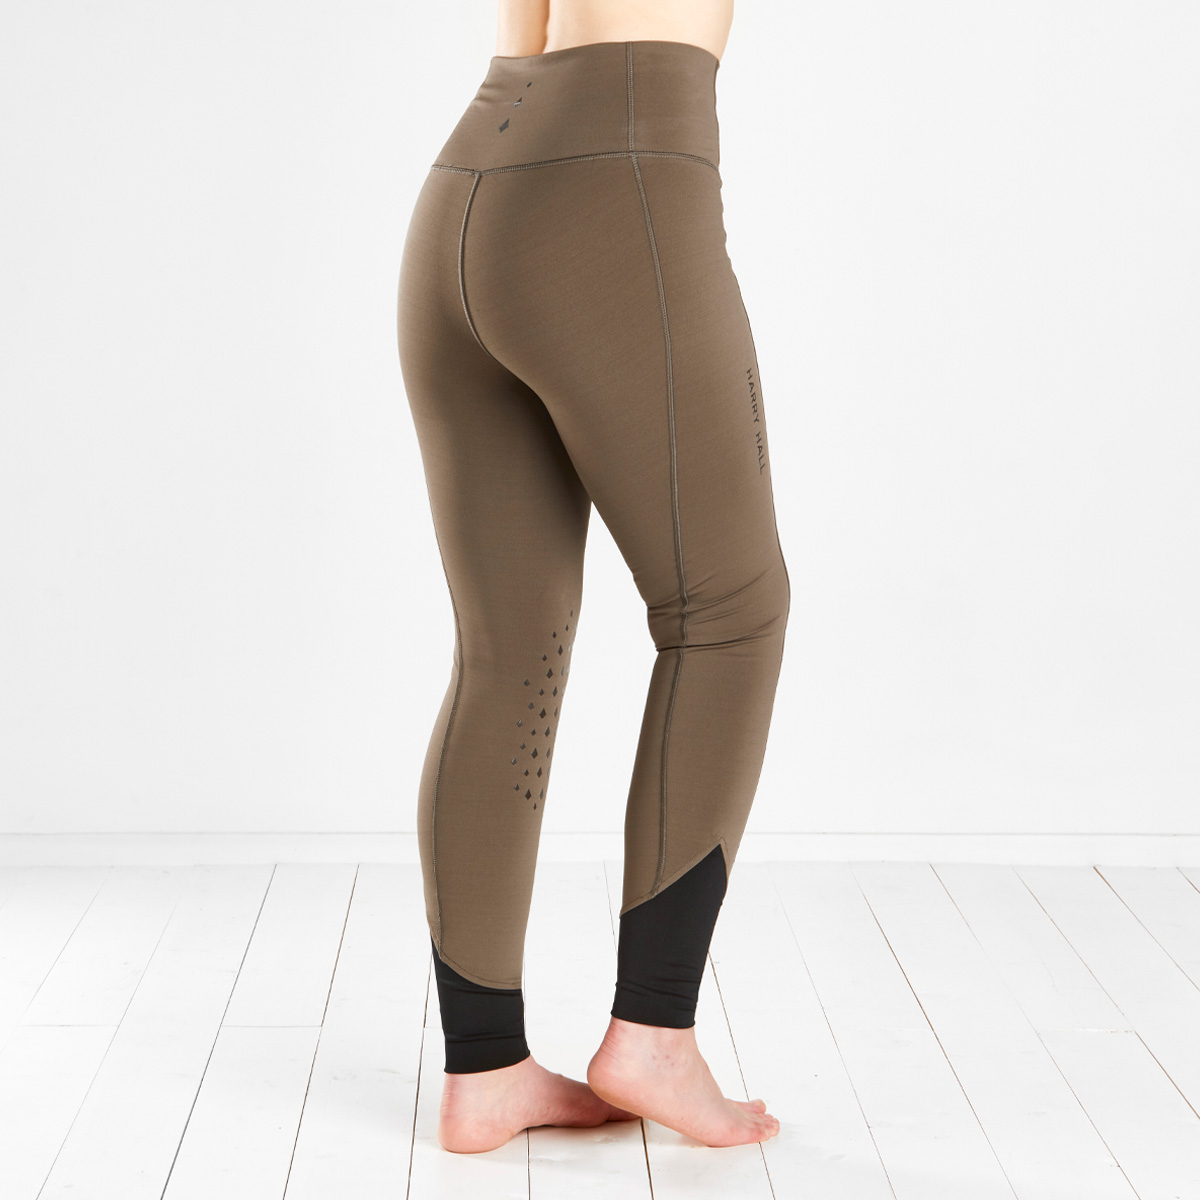 Womens Slim Fit Horse Riding Ladies Fleece Lined Leggings For Fitness And Equestrian  Riding Skinny Trouser For Horse Riders, Plus Size Available LJ201130 From  Kong04, $22.85 | DHgate.Com